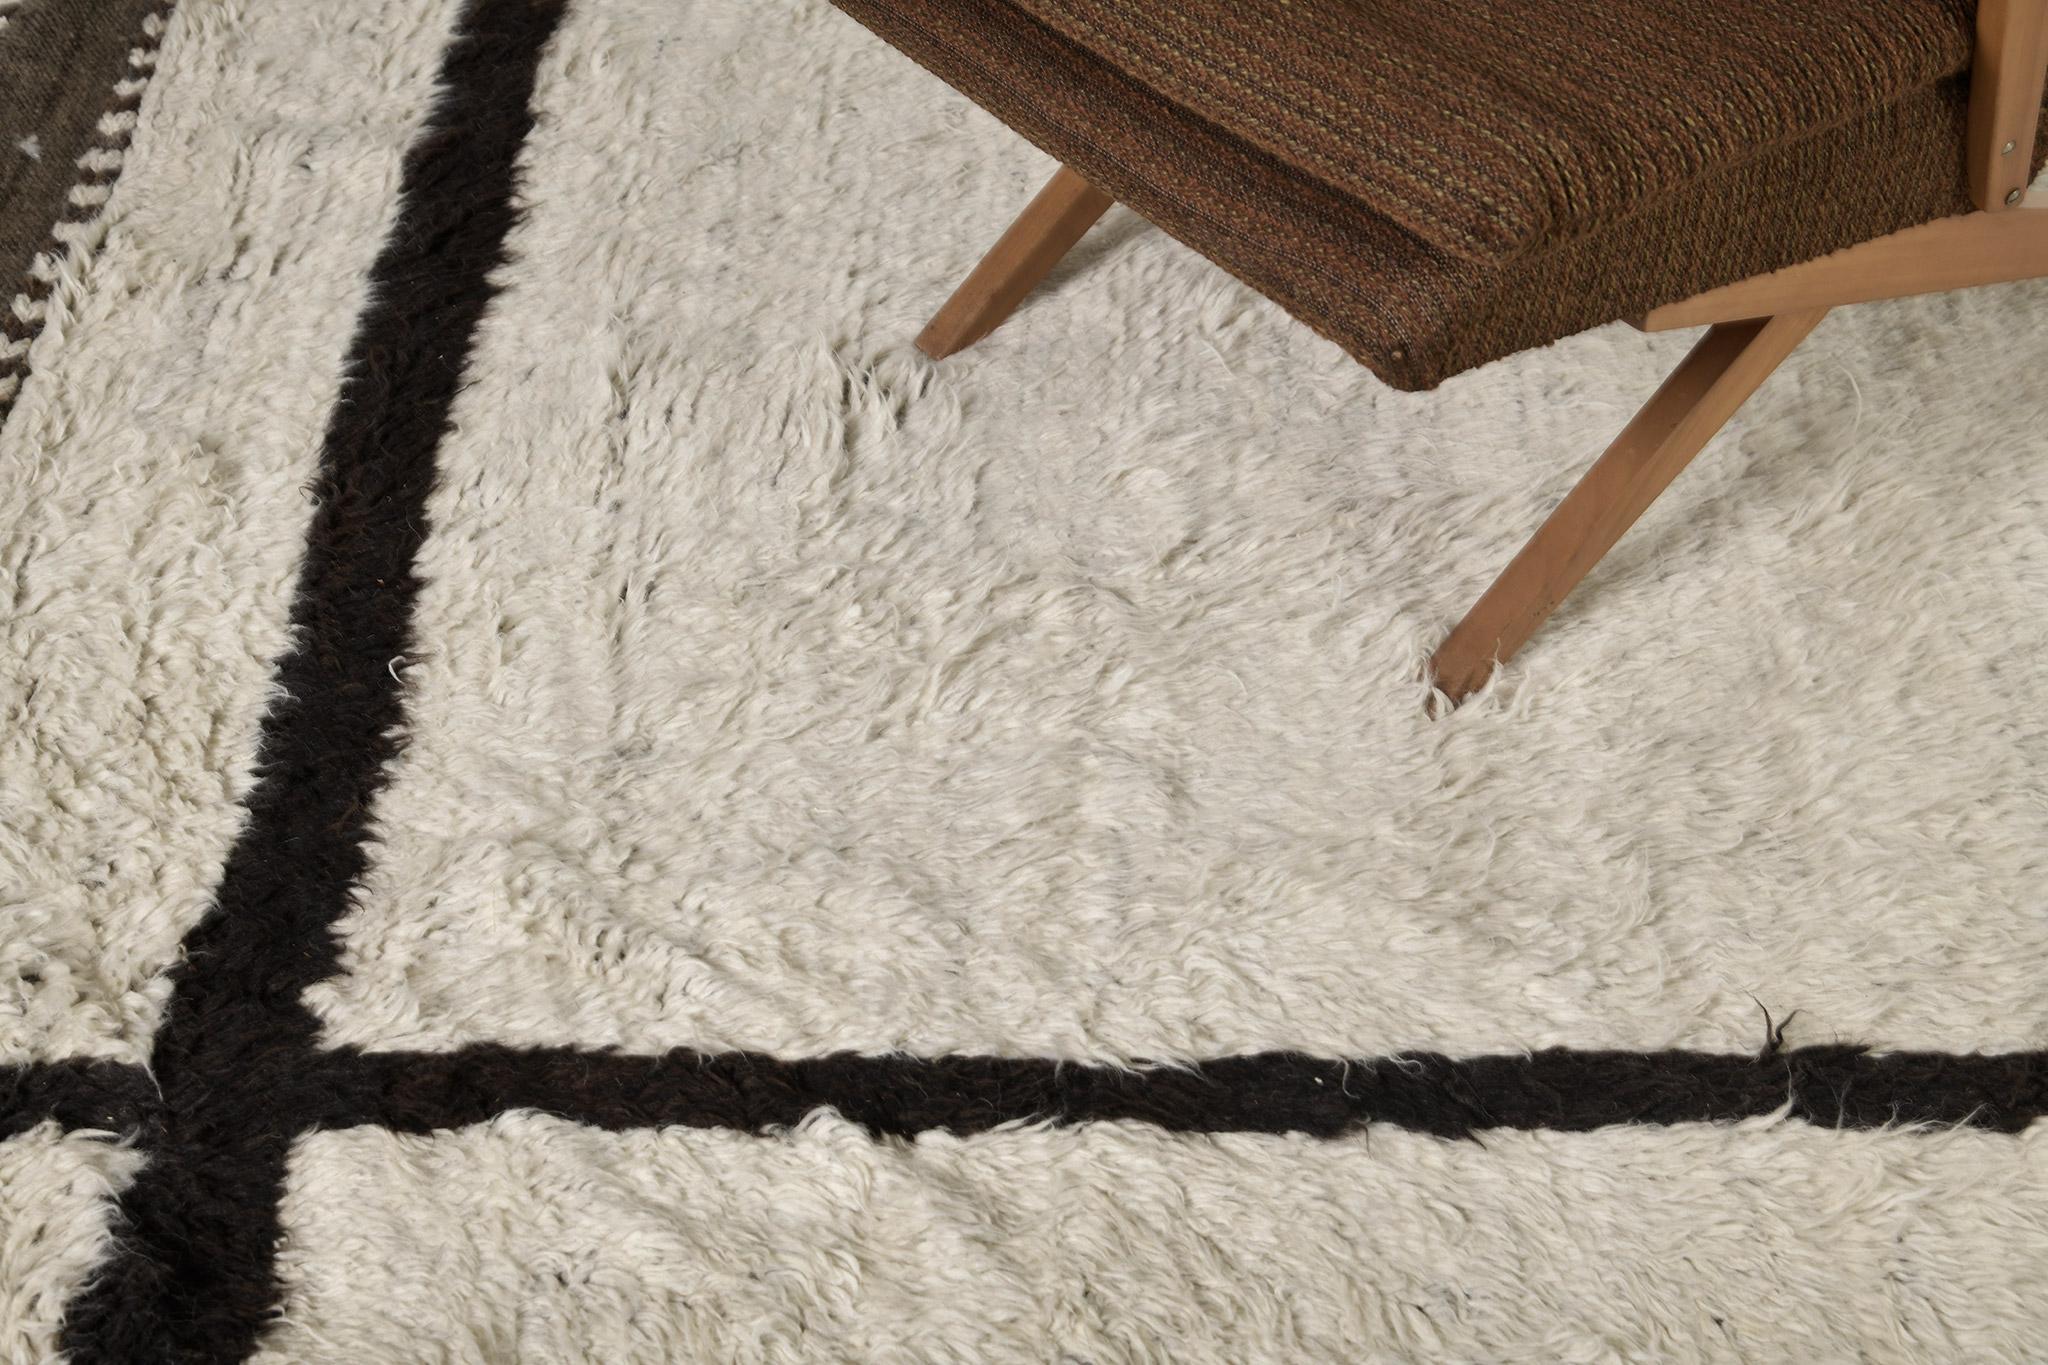 Vinos' is made of luxurious wool and timeless design elements. Its weaving of the perfect ivory field and sporadic umber brown piles creates a unique design and is what makes the Atlas Collection so unique and sought after. Mehraban's Atlas